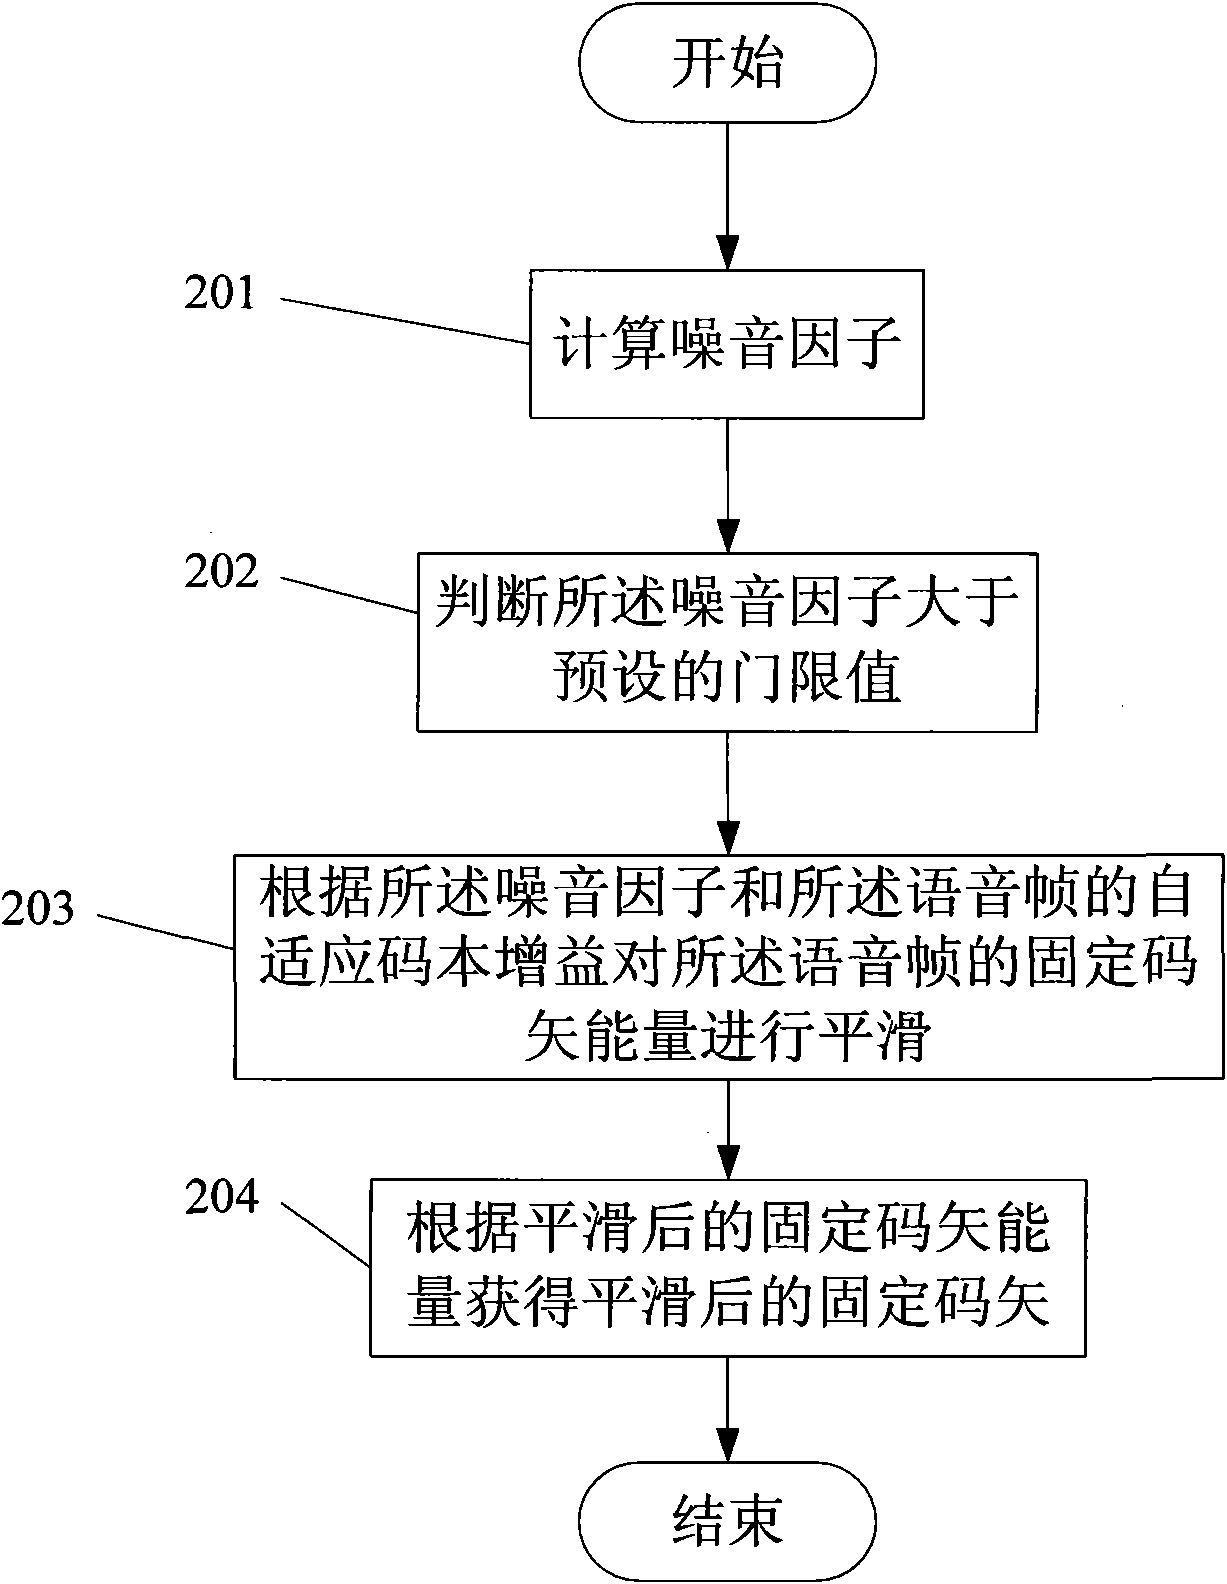 Method and device for noise enhancement post-processing in speech decoding